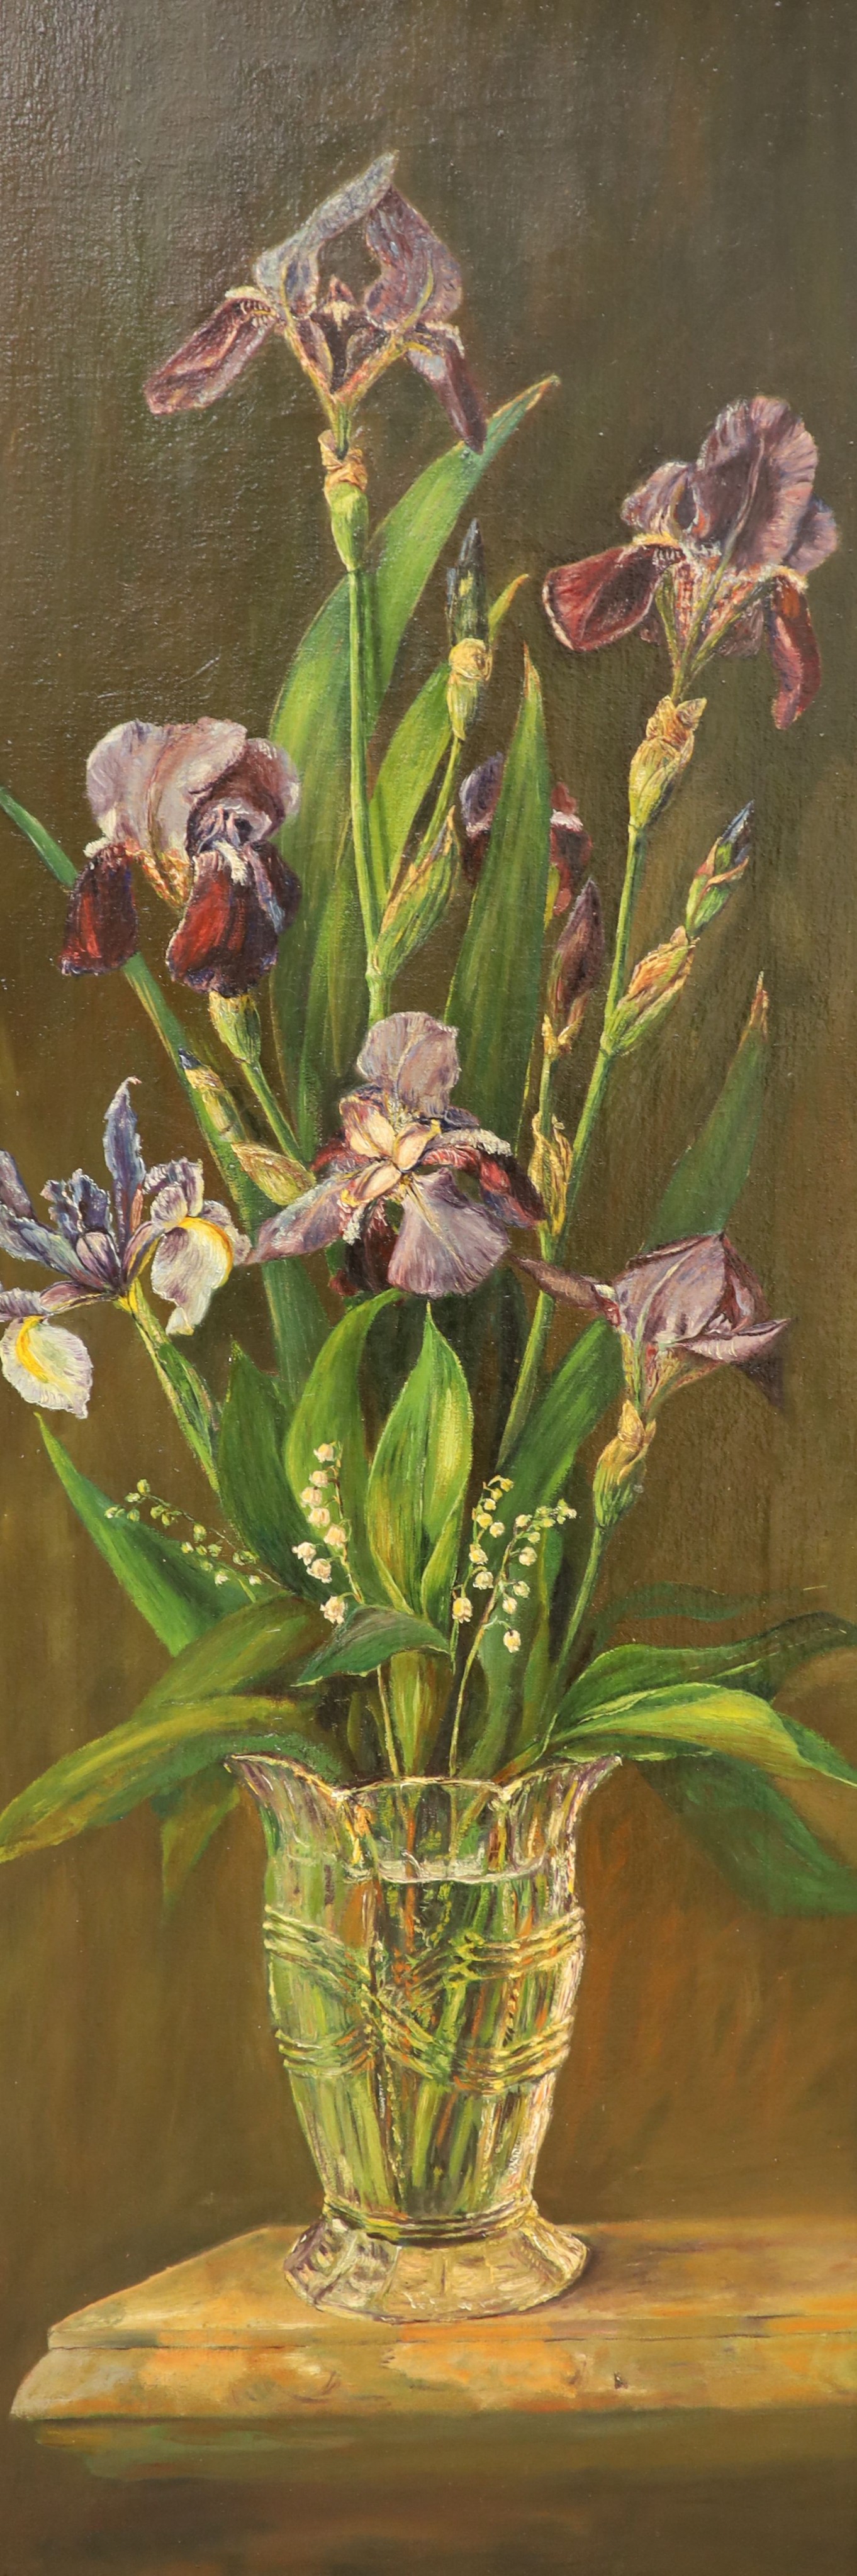 English School c.1900, pair of oils on canvas, Still lifes of irises and hollyhocks in vases, 94 x 32cm